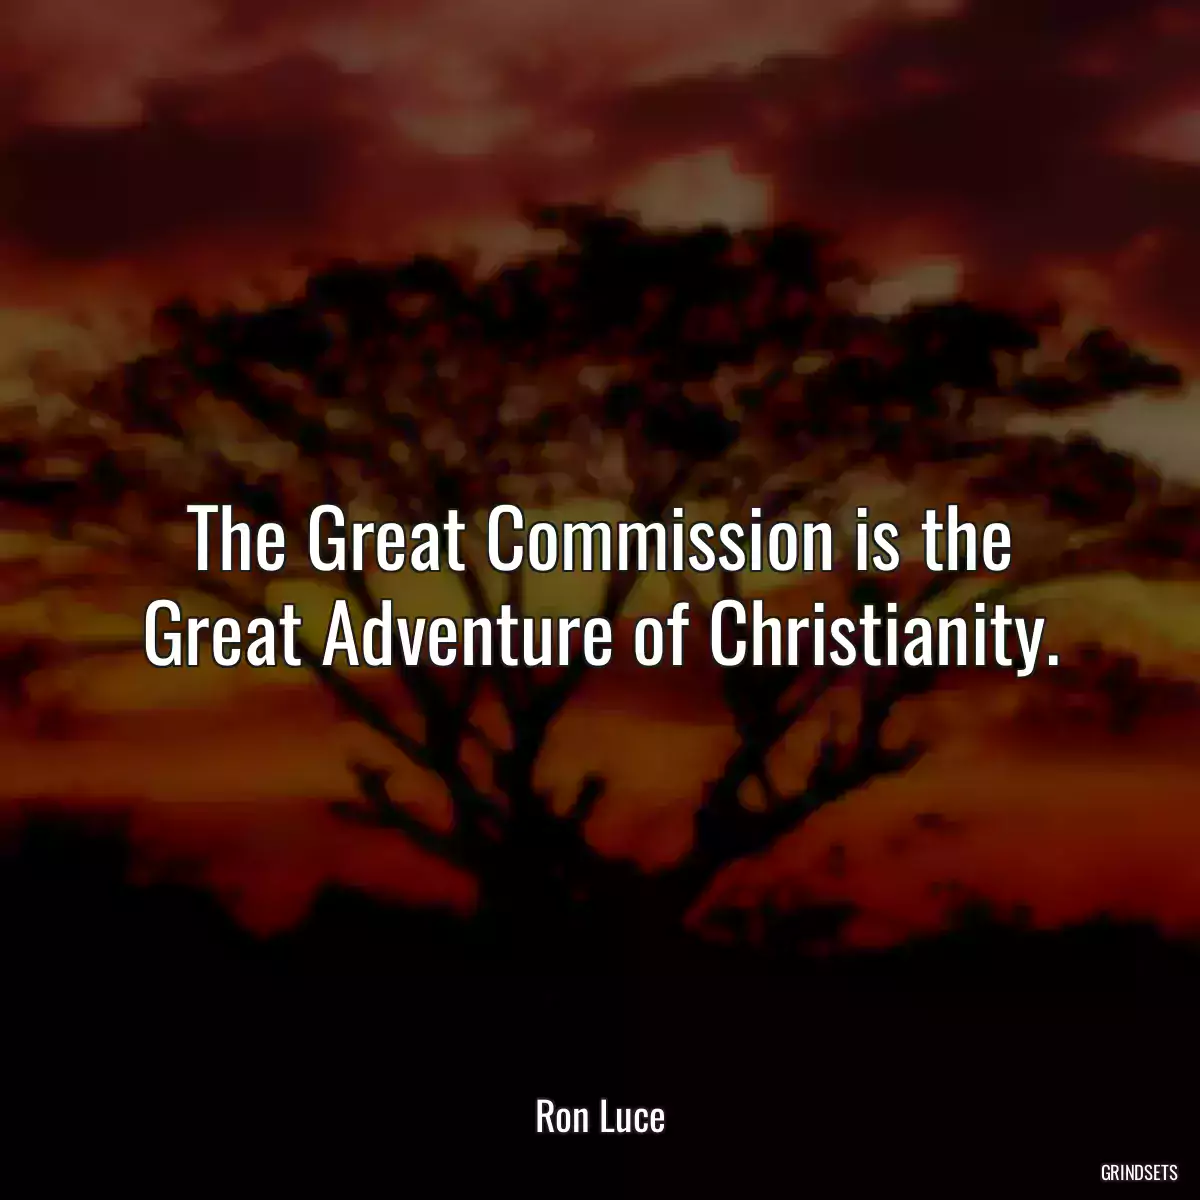 The Great Commission is the Great Adventure of Christianity.